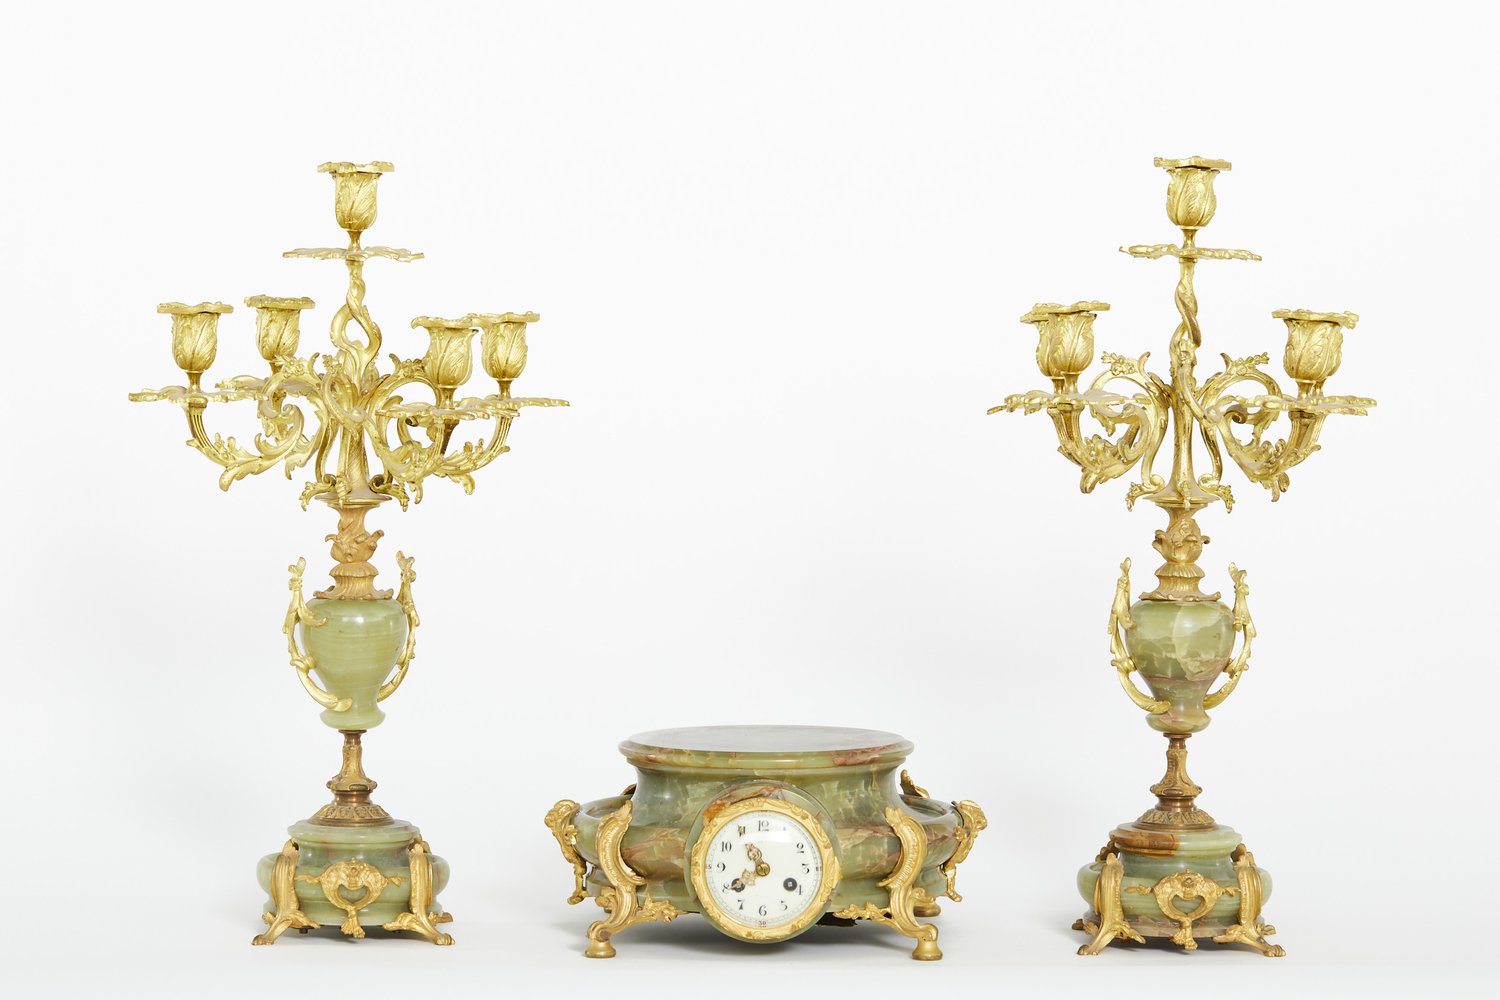 Pair of 19th Century Gothic Revival Gilt Bronze Altar Candlesticks at  1stDibs